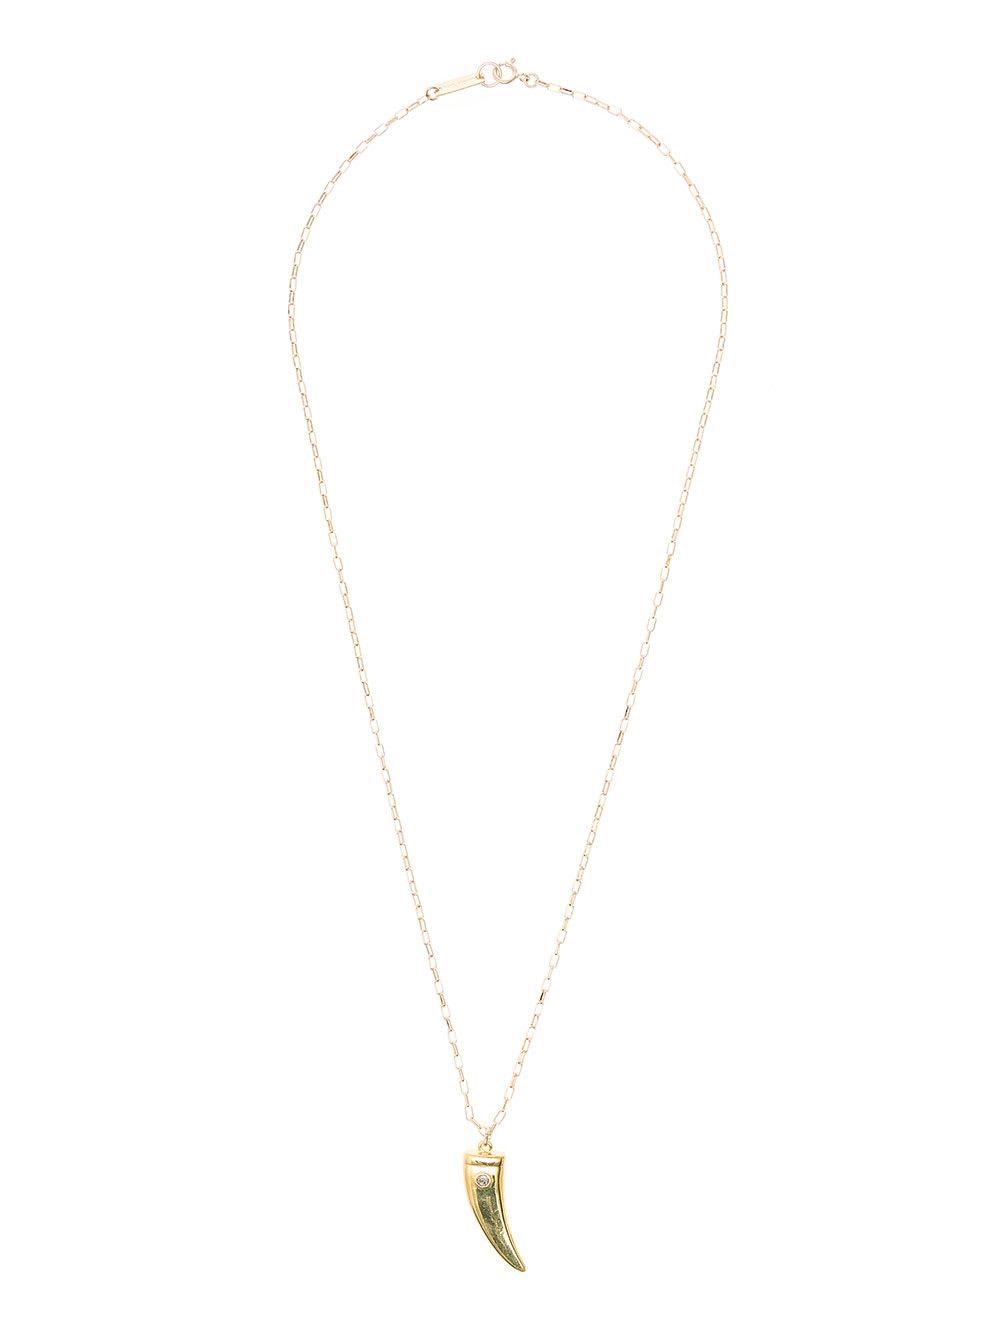 Isabel Marant Womans Long Metal Necklace With Gold Colored Horn Pendant